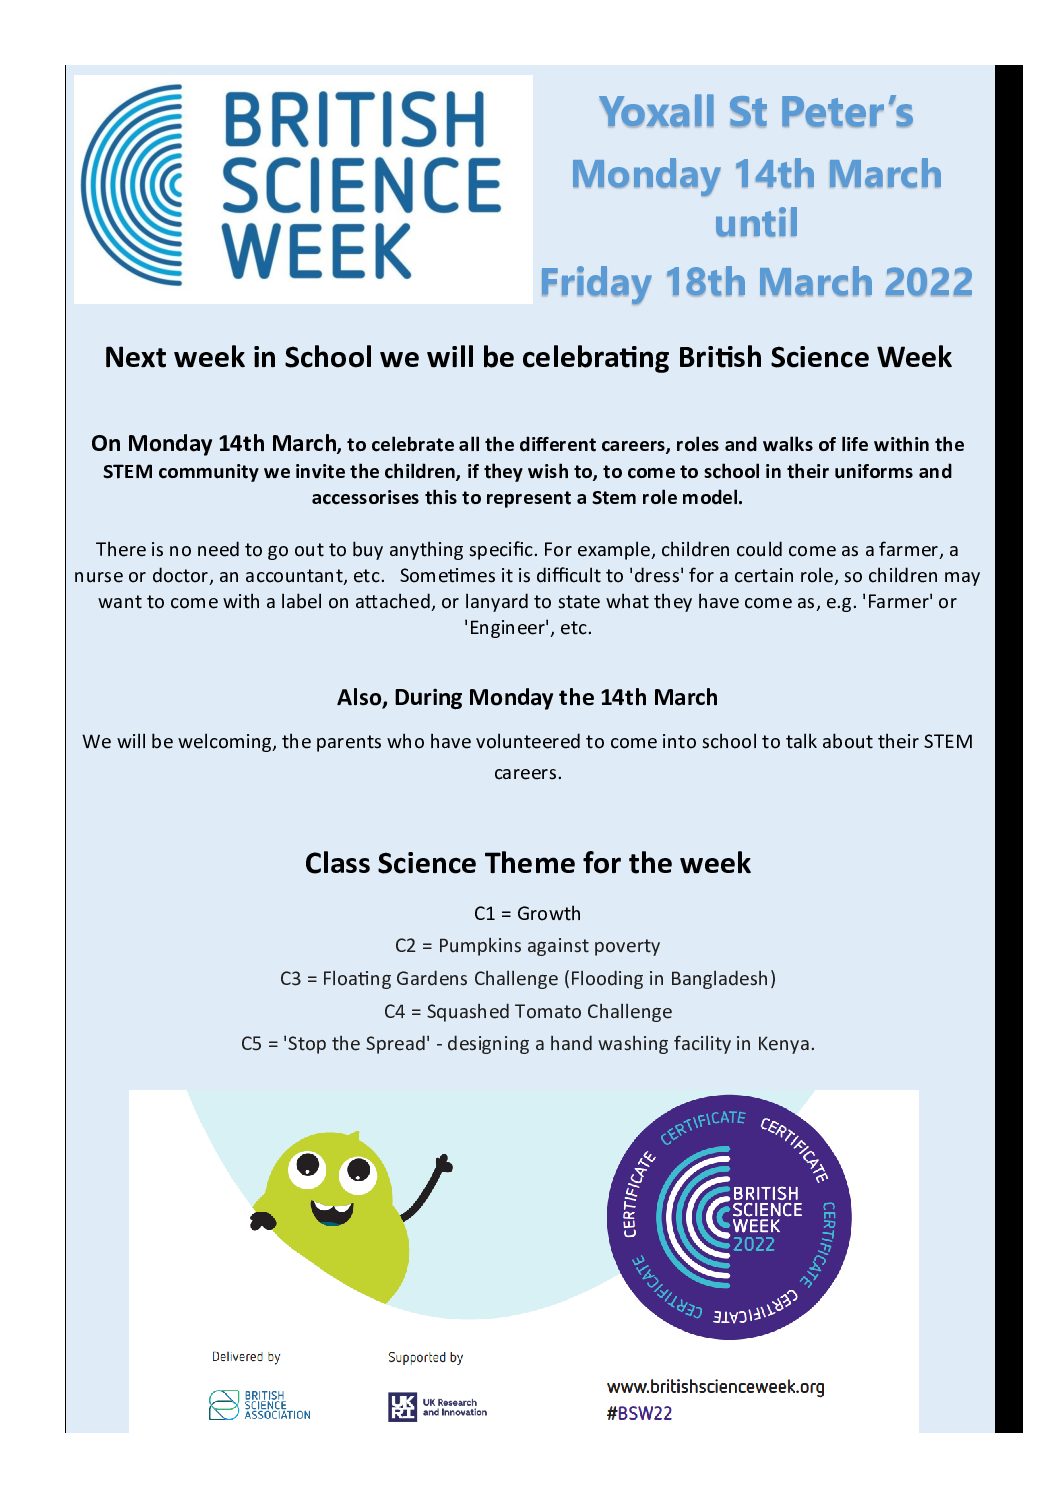 Science Week in School – Monday 14th – Friday 18th March 2022